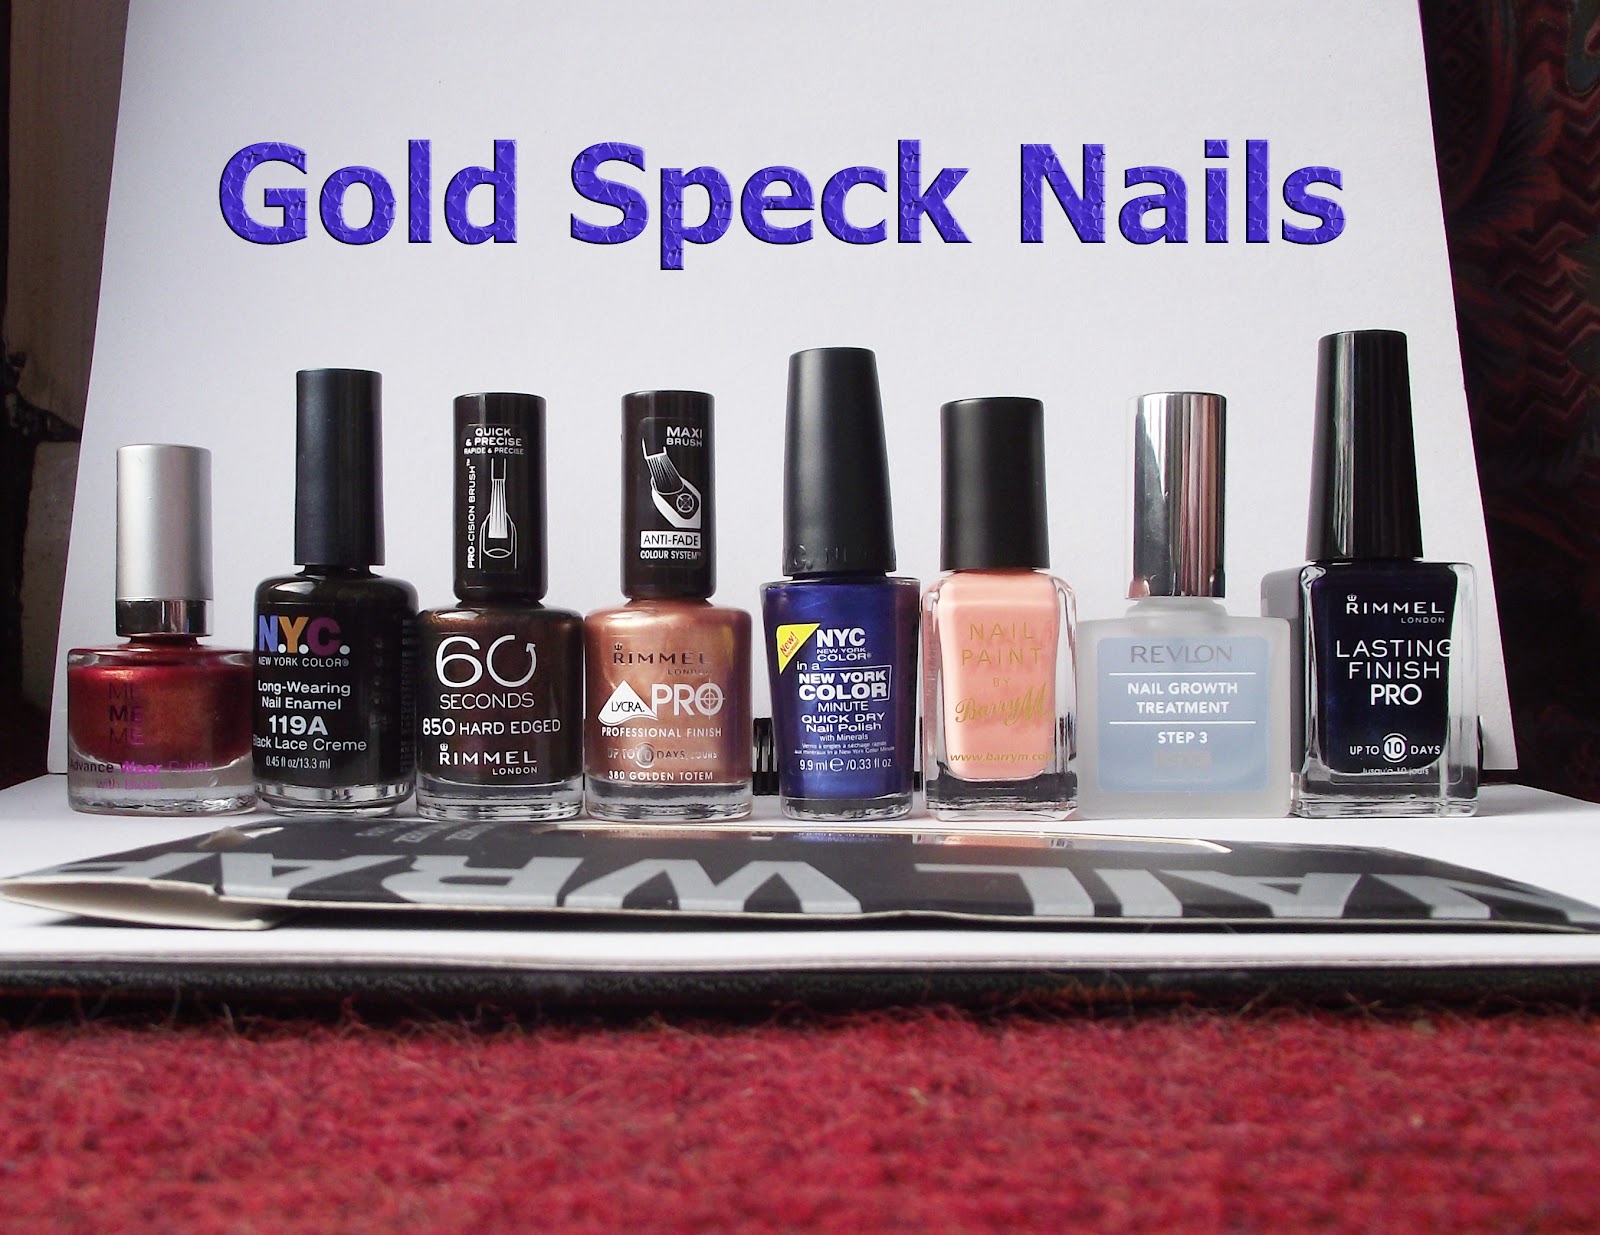 A Revlon Nail Growth Treatment & Gold Nail Wraps Which are much more gold in